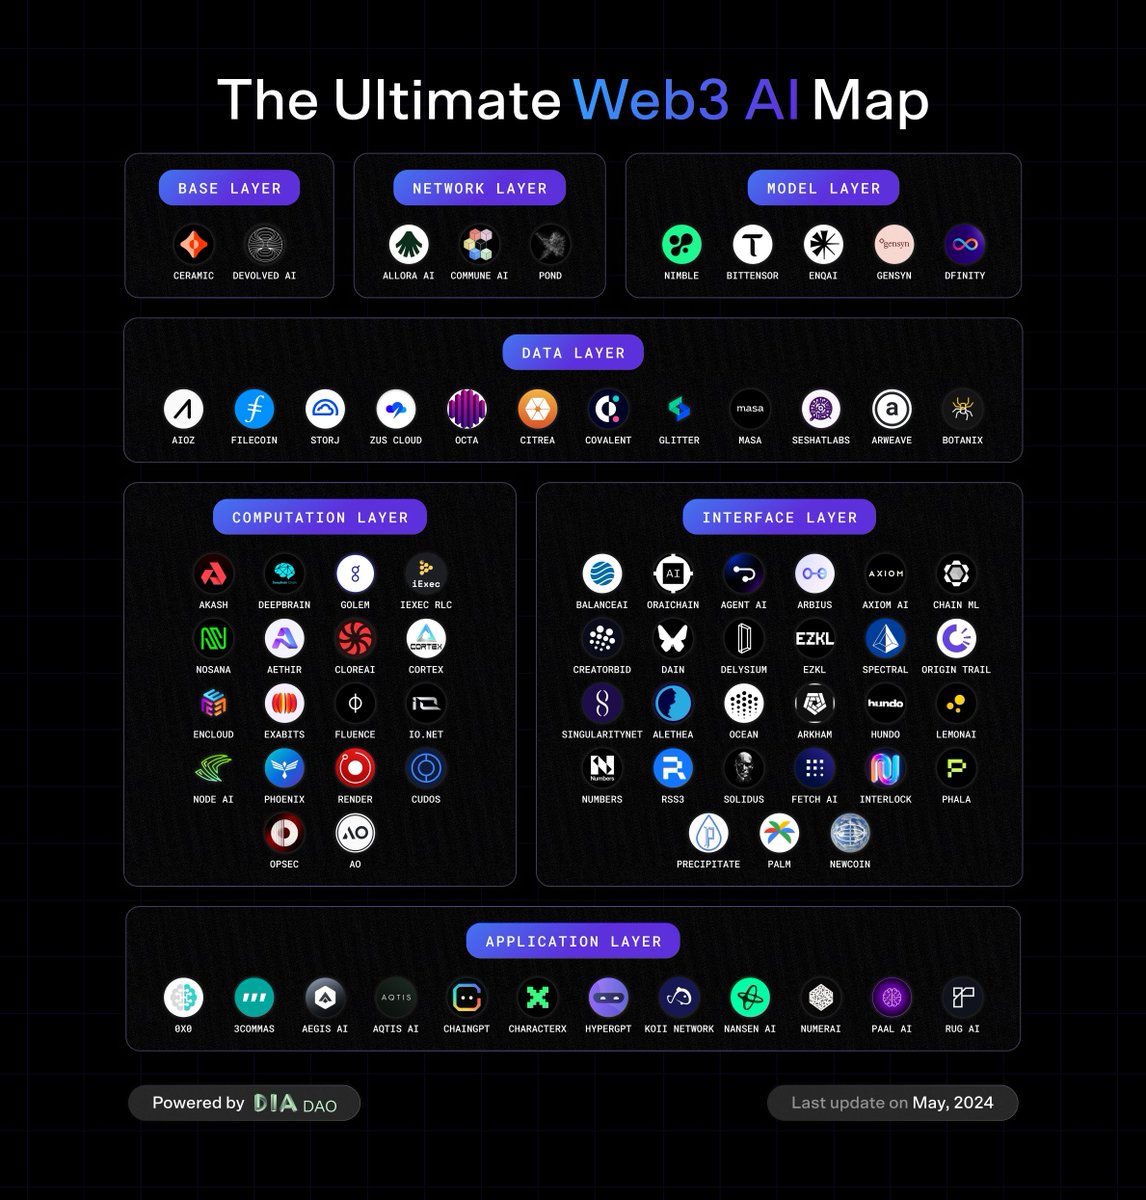 🤖 Excited to unveil The Ultimate Web3 AI Map! Discover how 75+ AI projects are transforming the Web3 landscape across various foundational layers. Dive into the most comprehensive research on AI projects building in the Web3 space. 🔗 diadata.org/web3-ai-map/